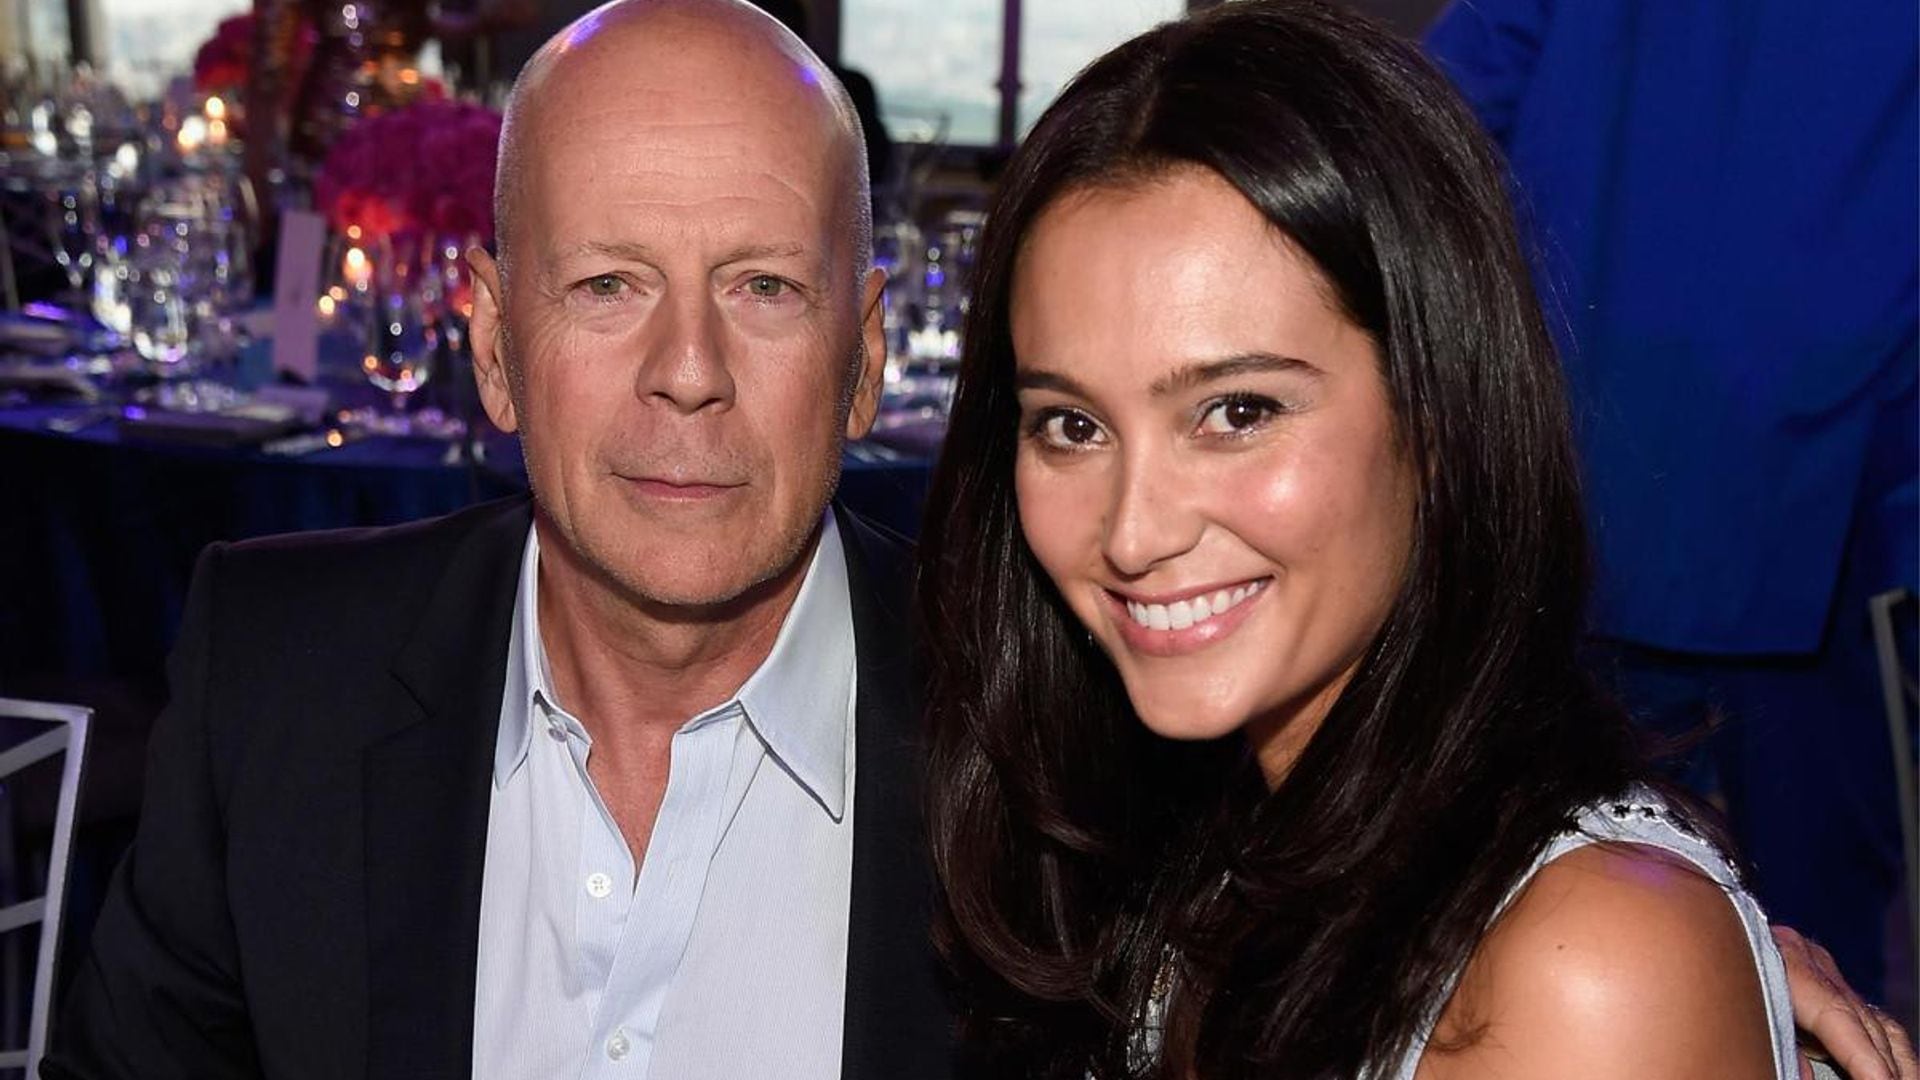 Bruce Willis’ wife Emma Heming gets emotional on his birthday: ‘I have times of sadness’